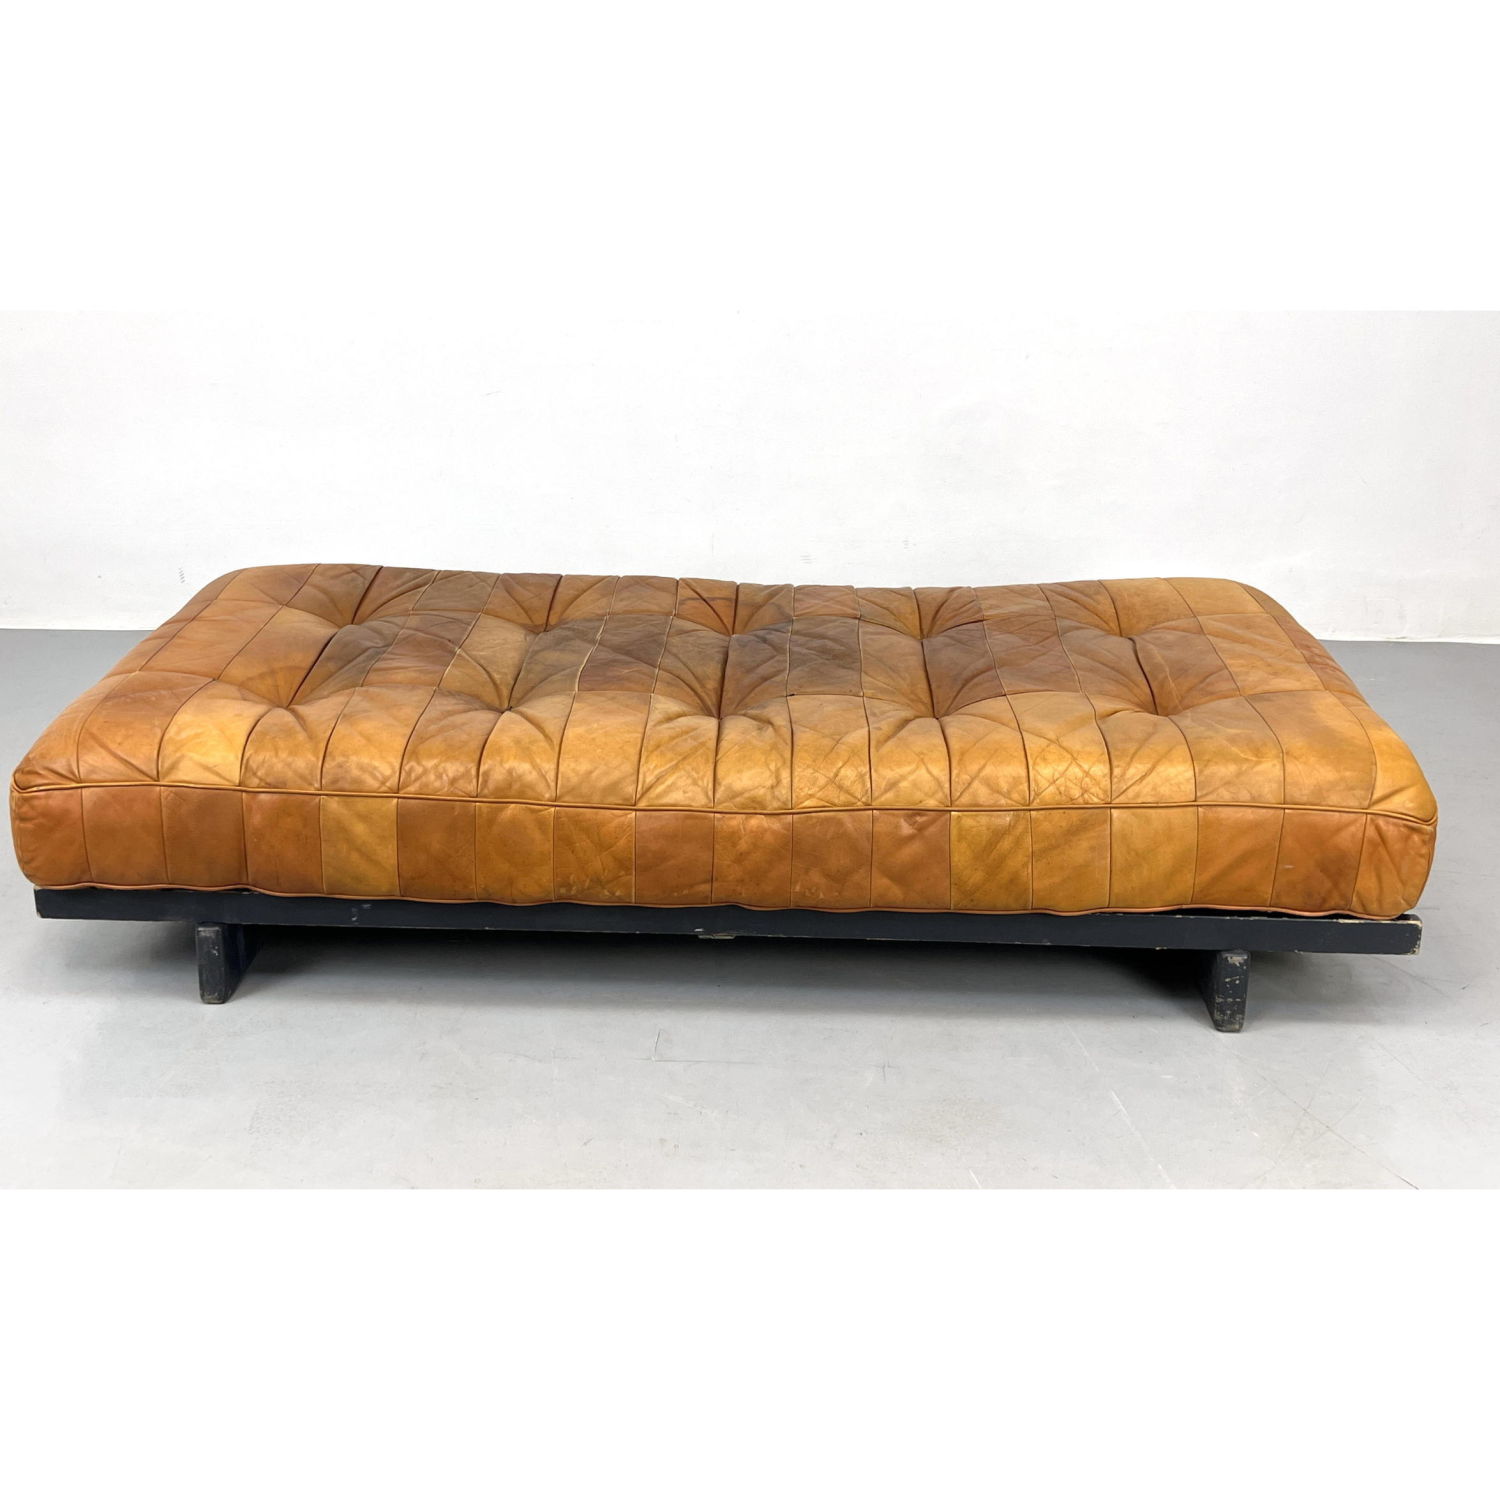 De Sede Leather Patchwork Day Bed.